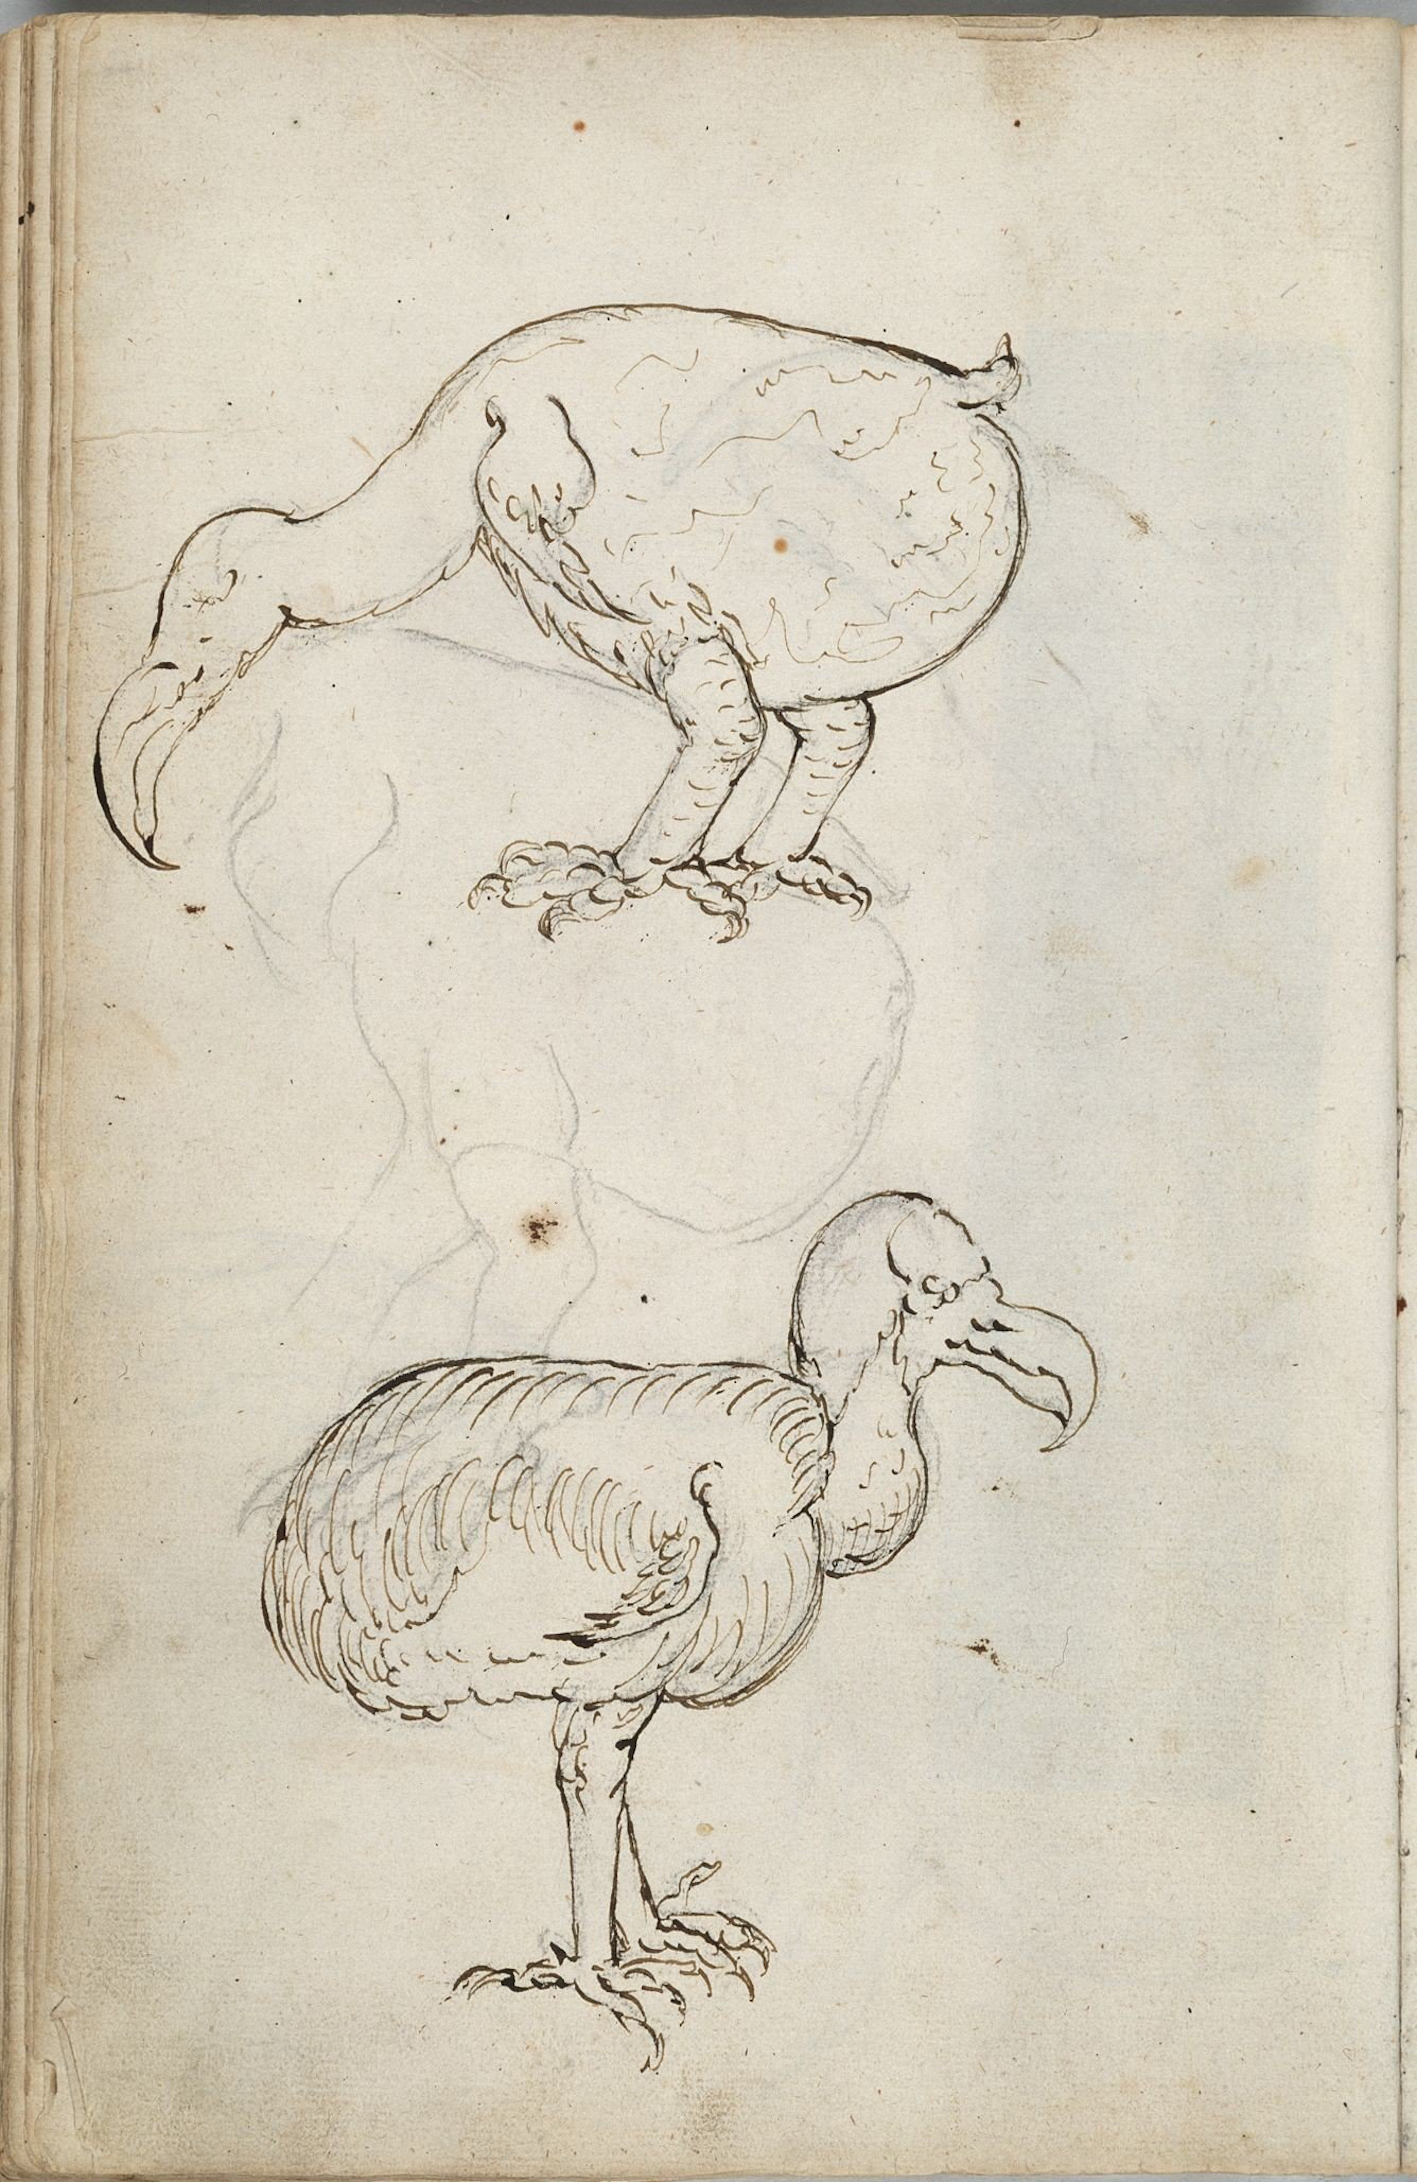 "Figure 4. Two sketches of a dodo, number 135 f. 64v."